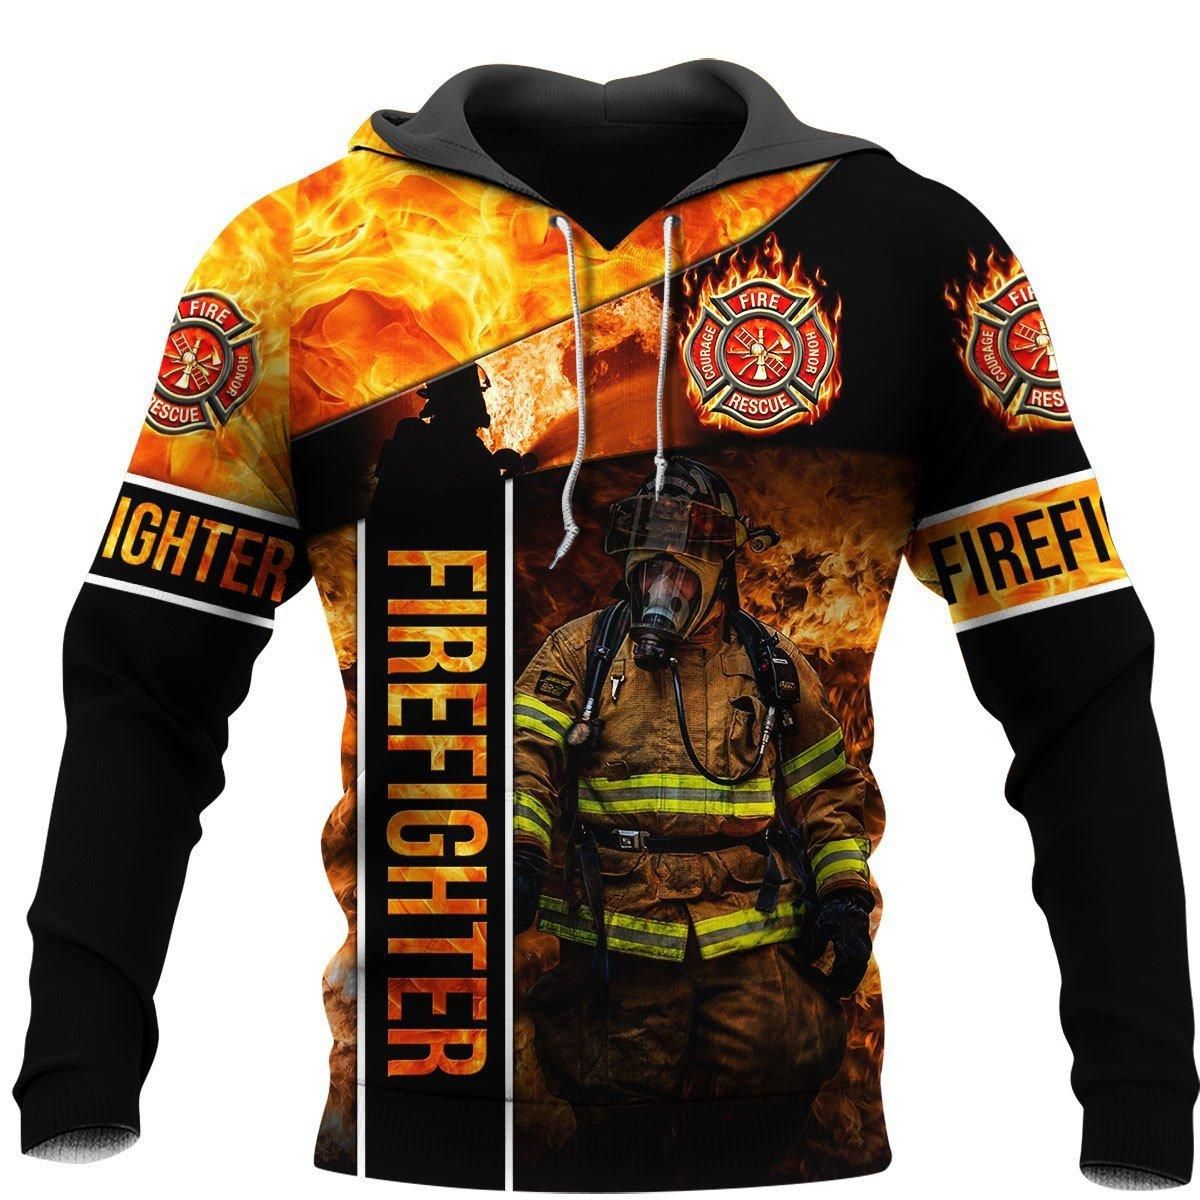 Brave Firefighter 3D All Over Printed Hoodie Shirt MP200305